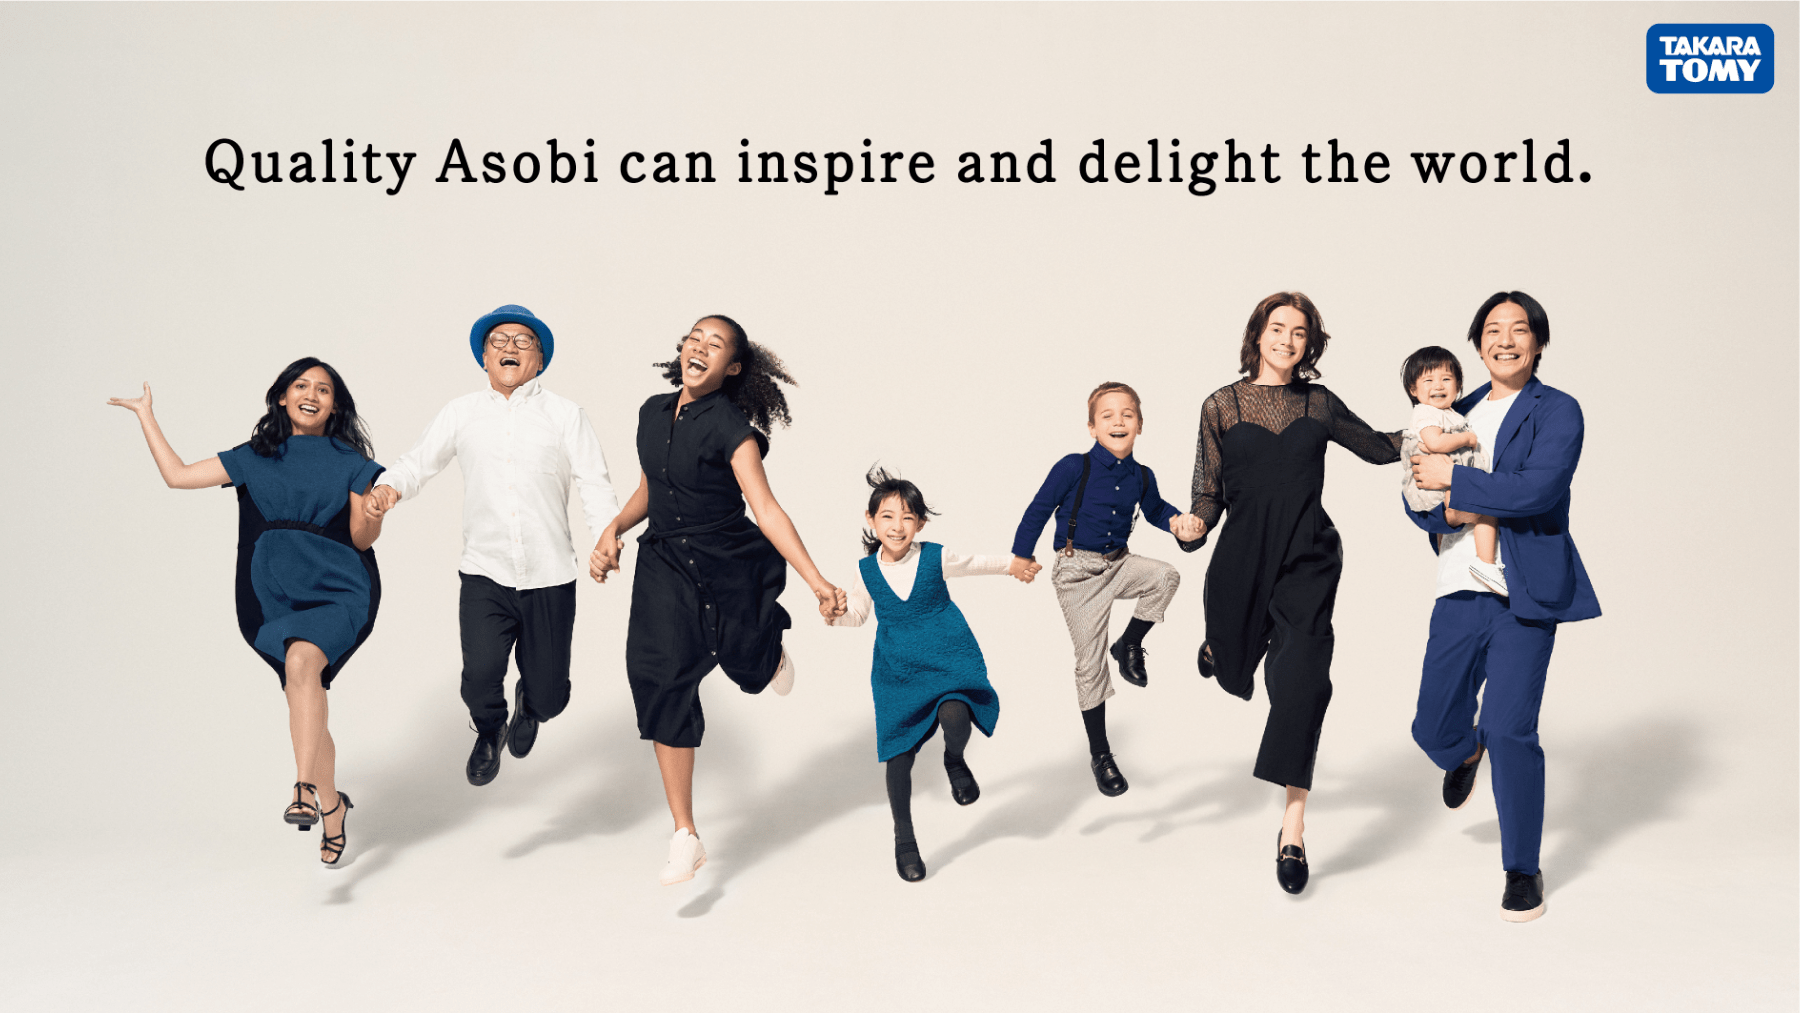 Quality Asobi can inspire and delight the world.